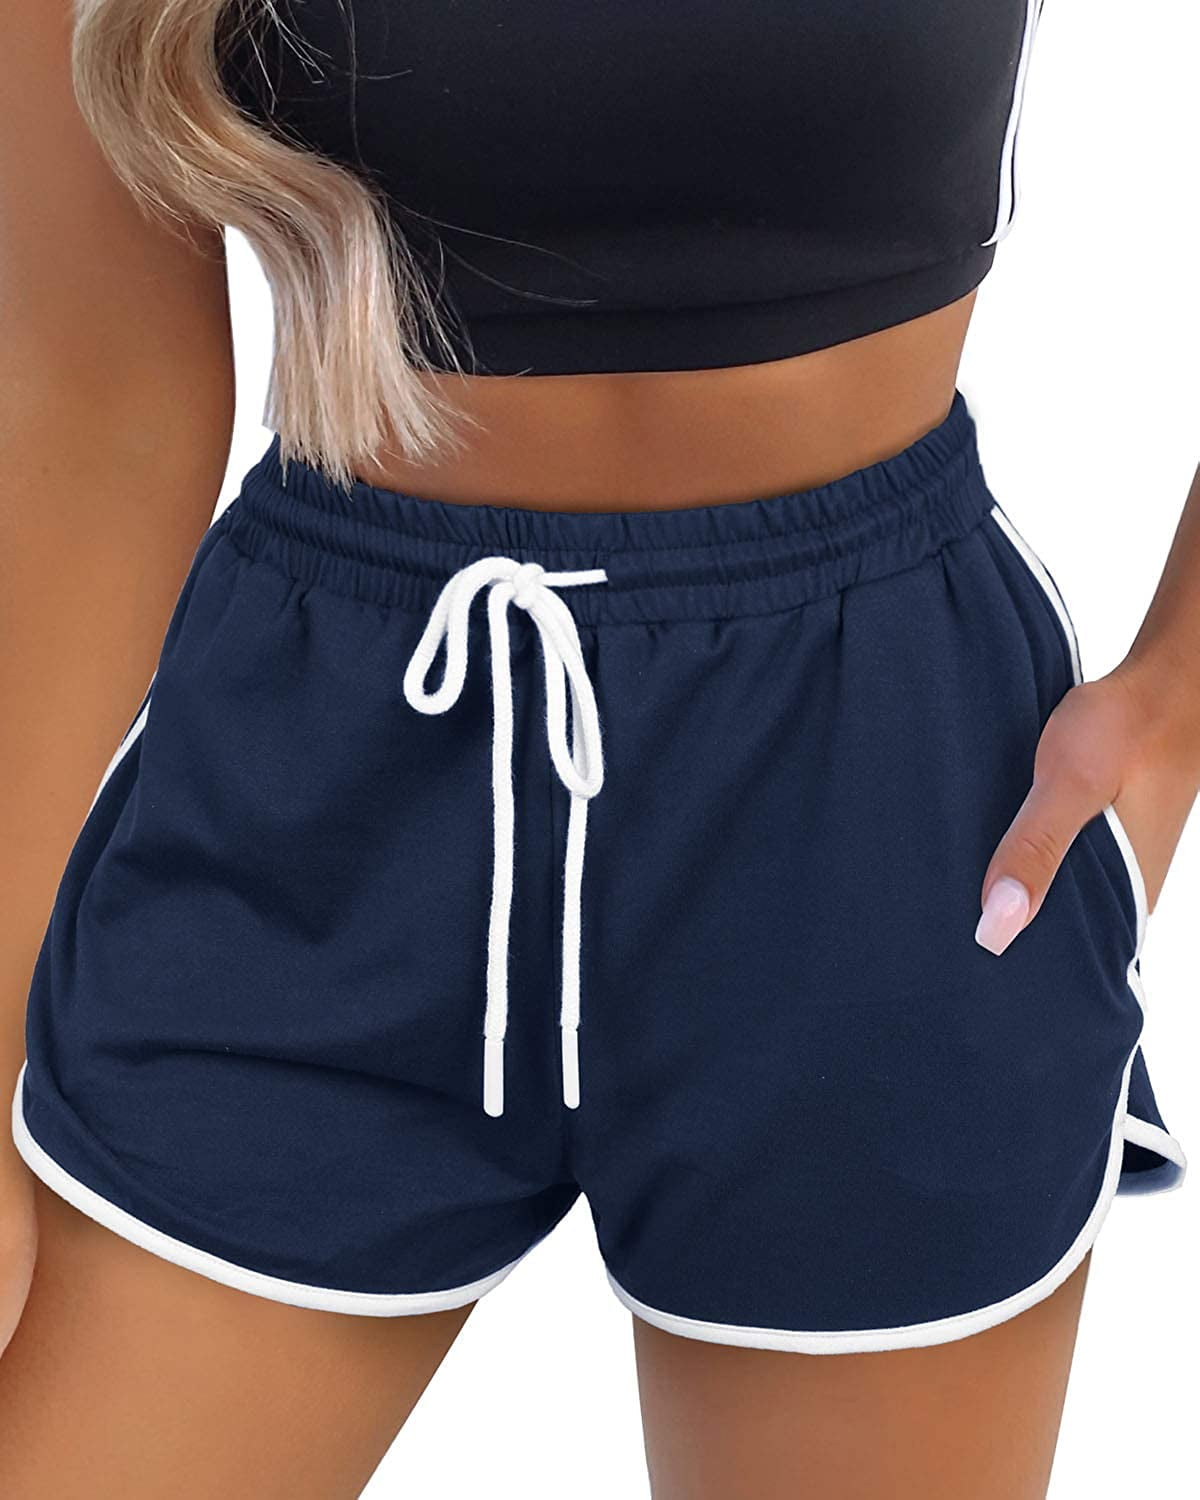 Womens Workout Shorts with Pockets Tie Dye Athletic Shorts Plain